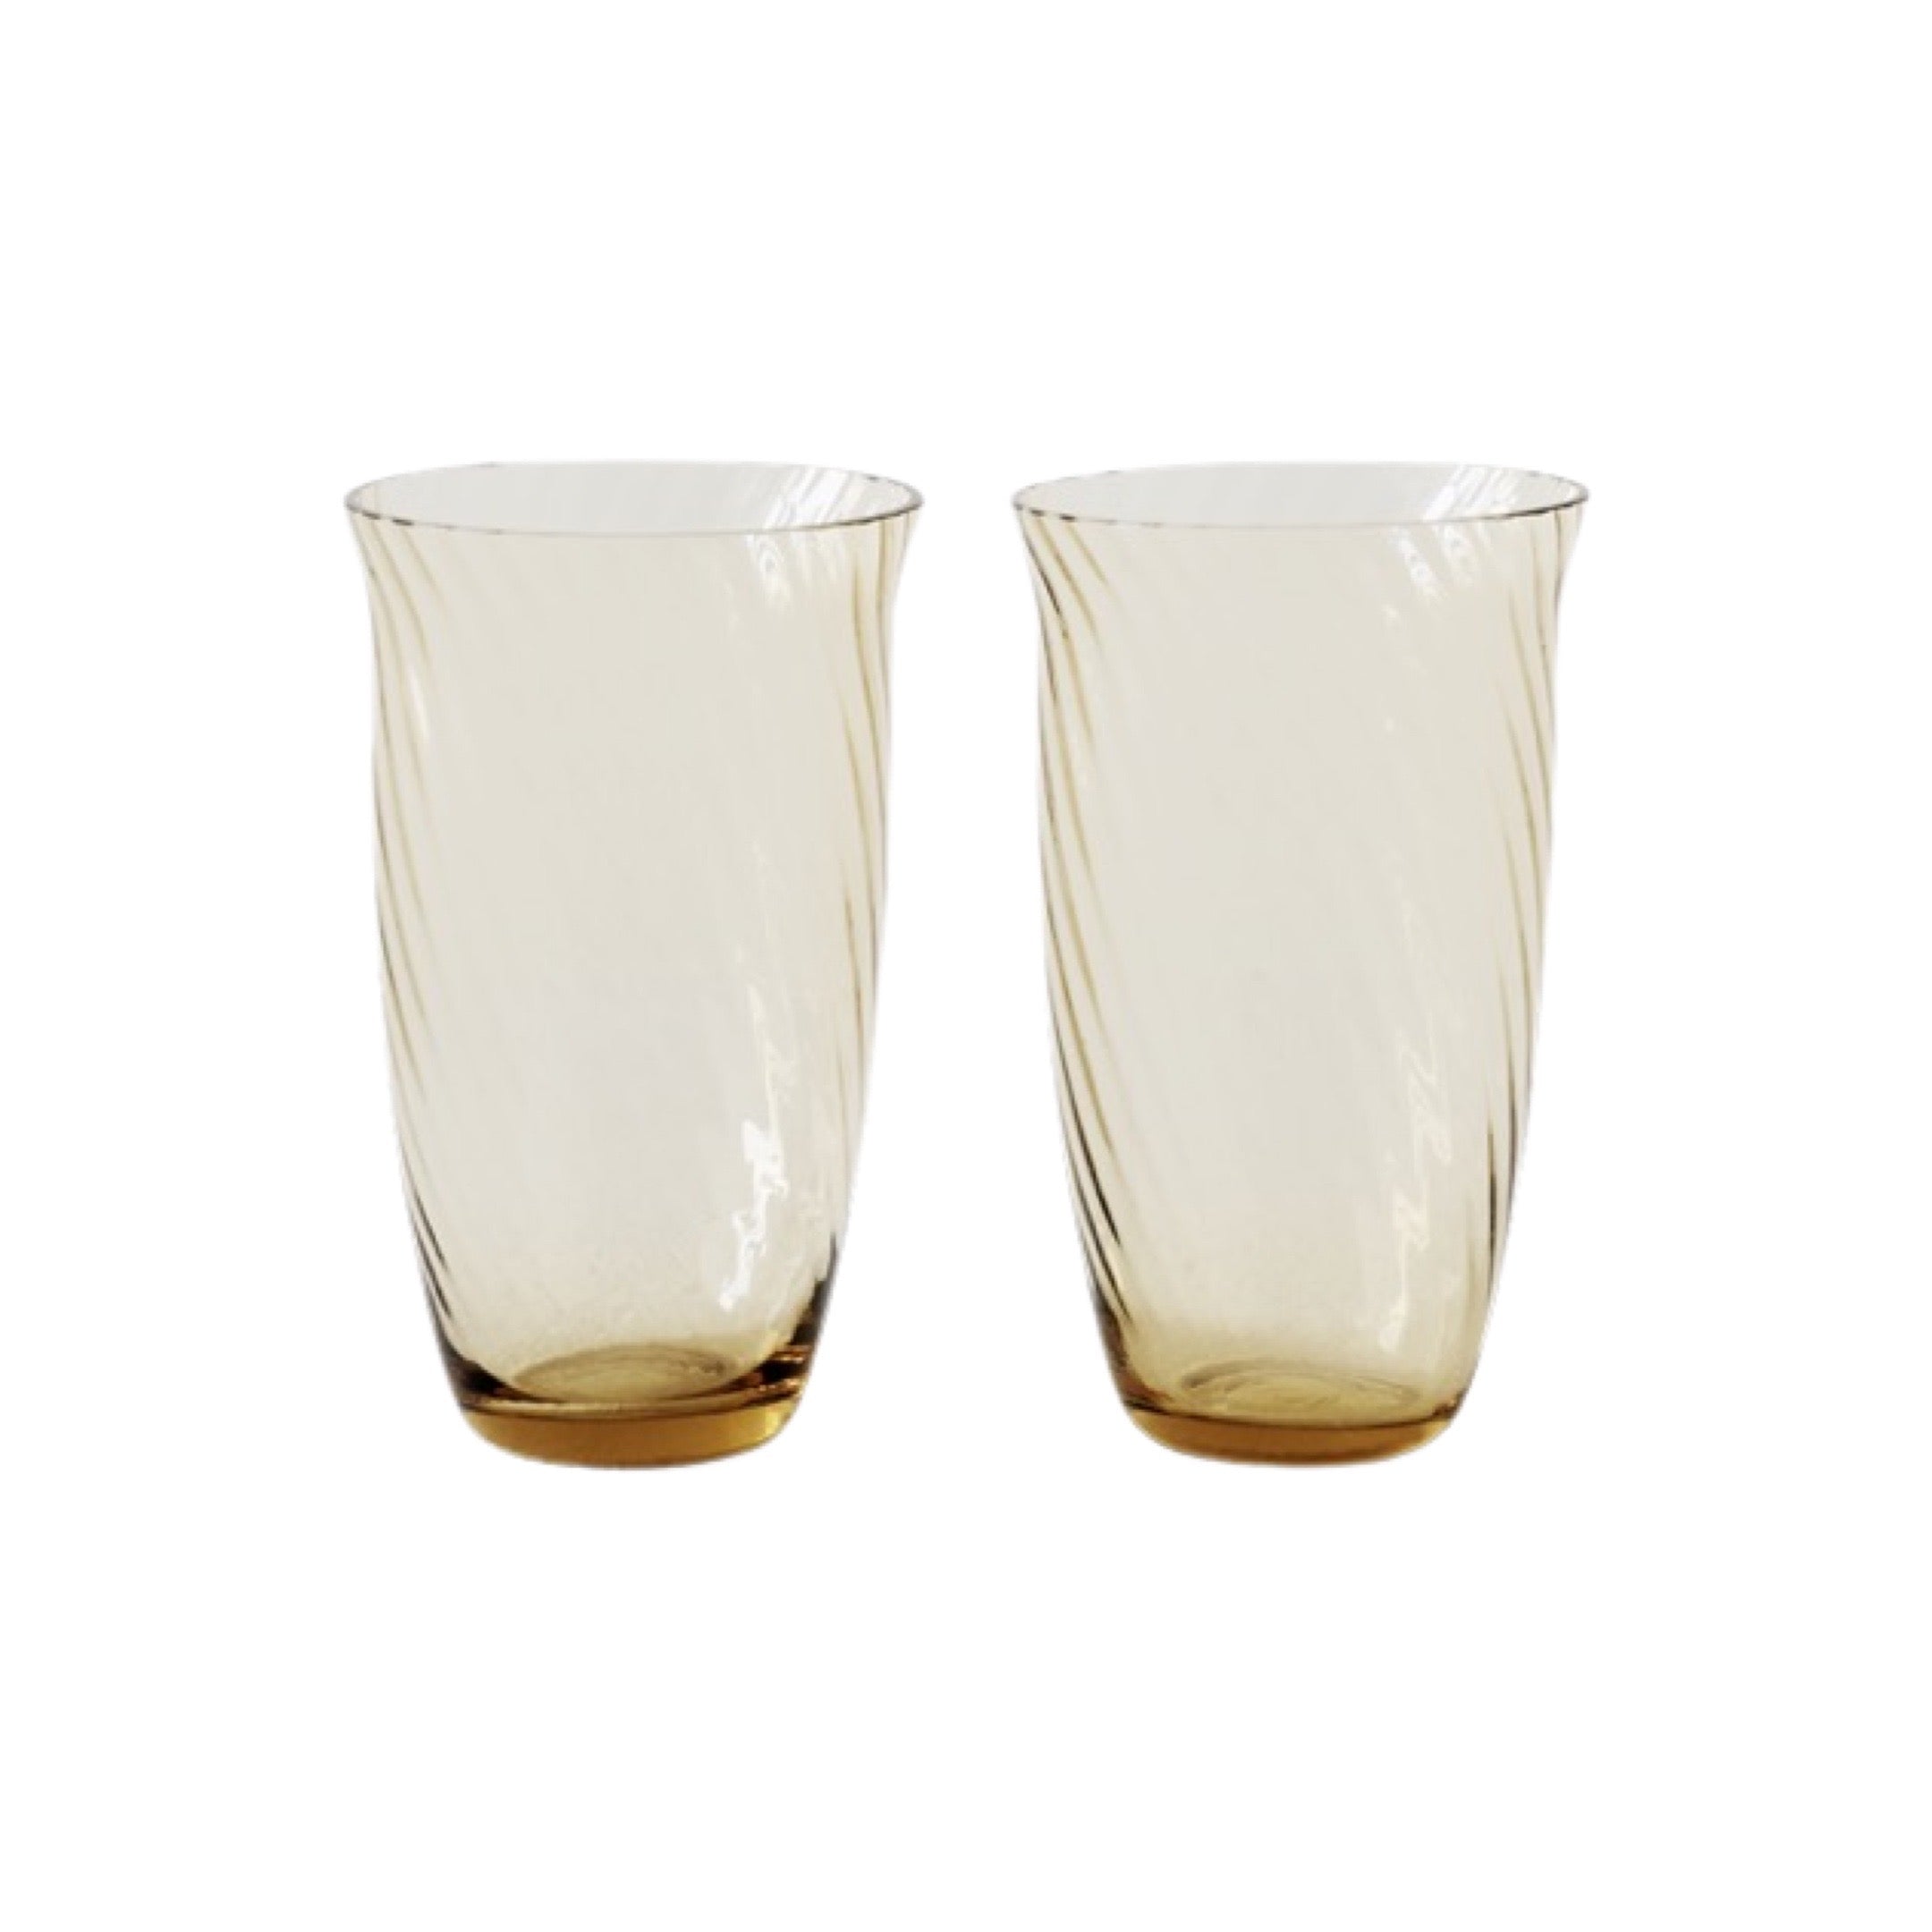 &Tradition Collect SC60 Drinking Glass - 165ml (Set of 2)